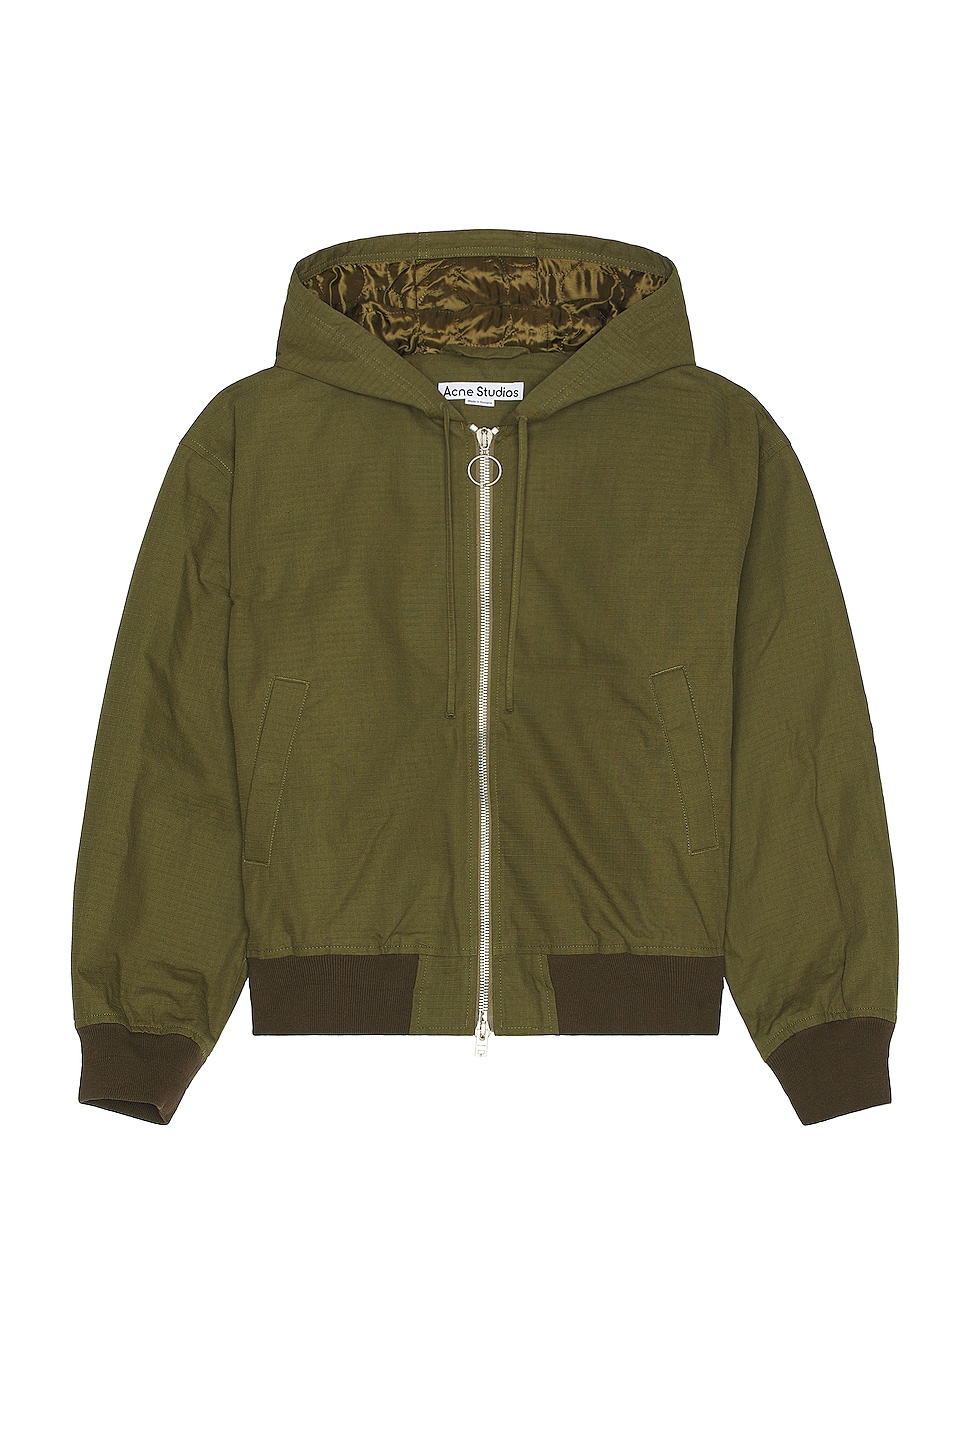 Image 1 of Acne Studios Bomber Jacket in Olive Green